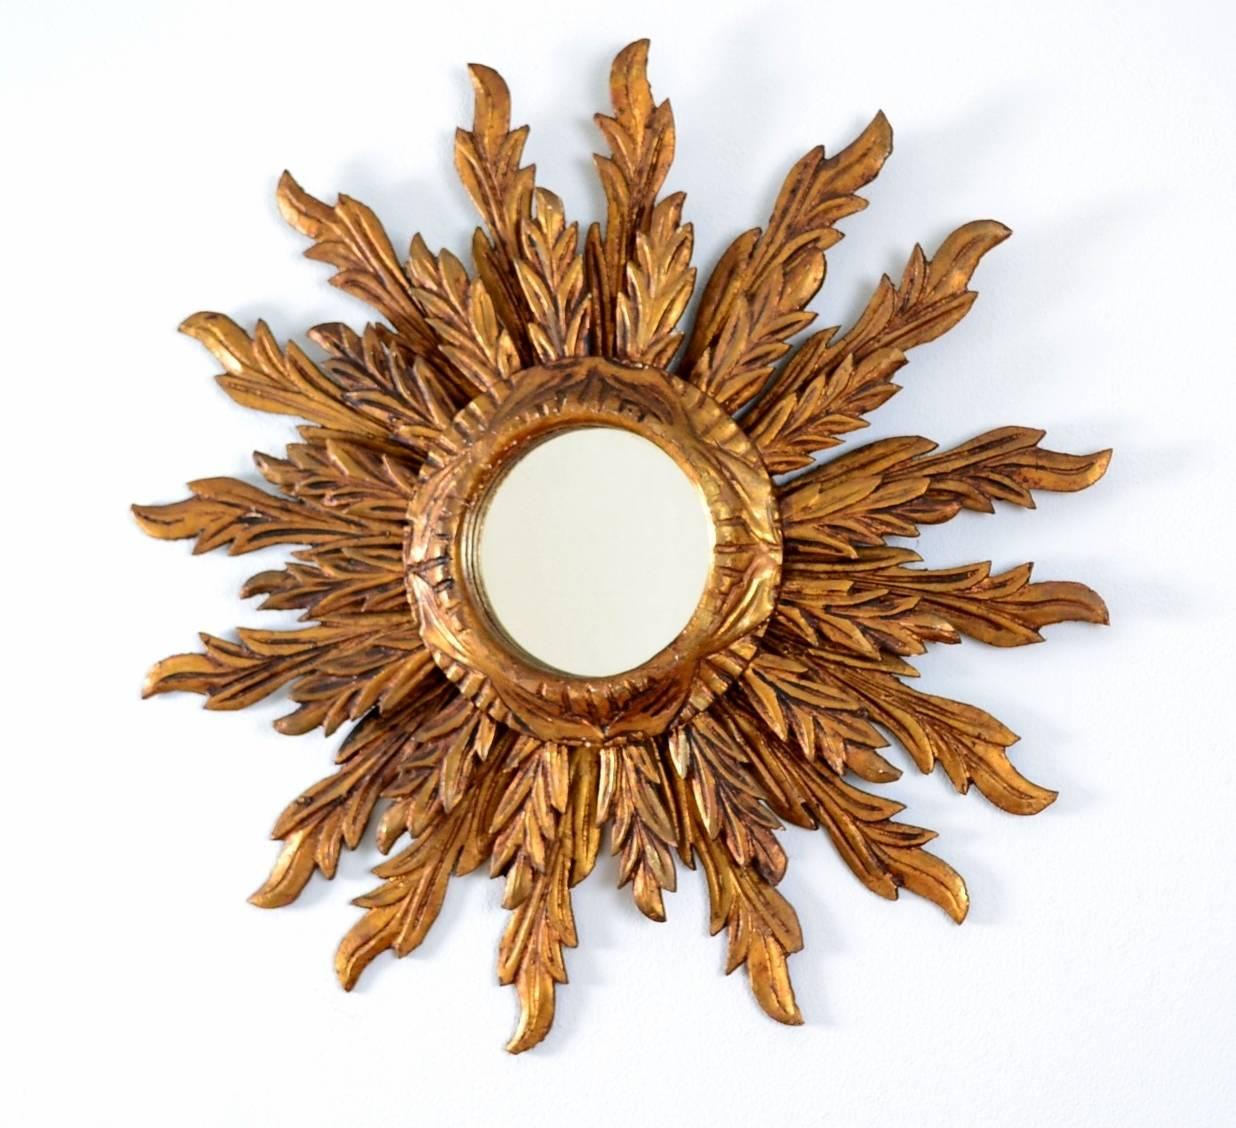 A beautiful old Italian sunburst mirror from the 1930s with its original mirrored glass.
The starburst giltwood is disposed in two layers and has a total of 32 sunbeams, divided by 16 per tier, of different heights and lengths.
Each part is